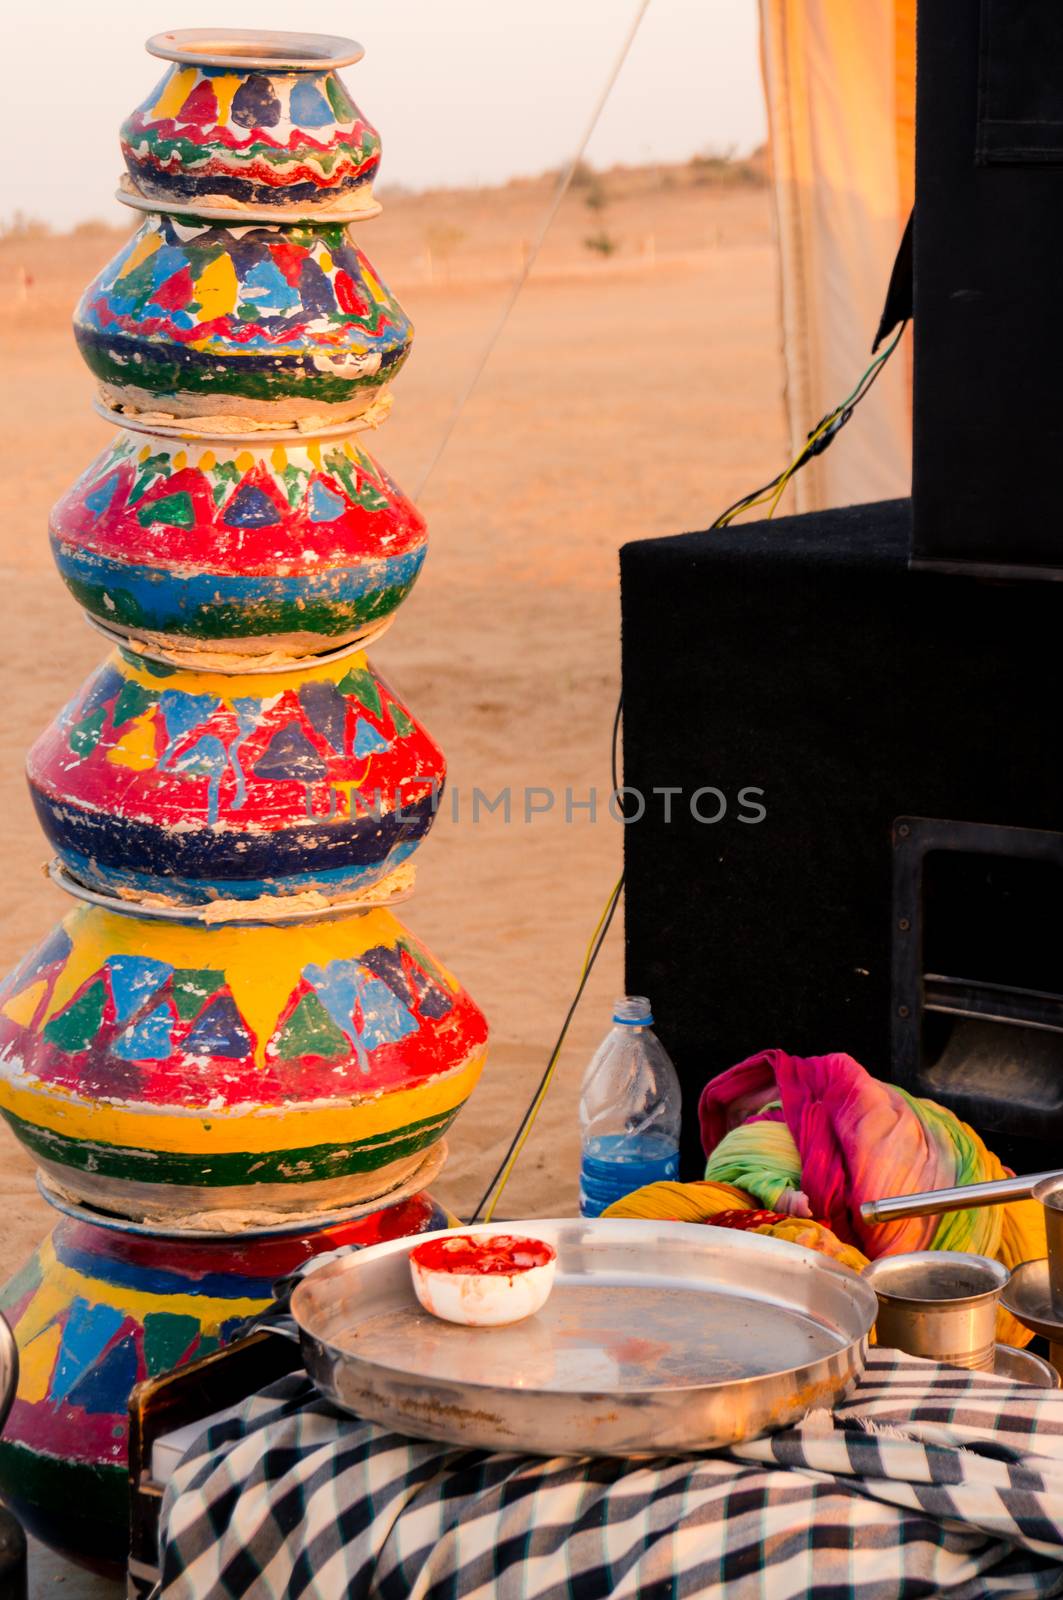 Evening shot showing the props like clayware pots, clay pots, dishes, kettle, mics and more as props for traditional rajasthani dances for visitor entertainment at a desert camp. Shows the colorful traditions of rajasthan the biggest state of India